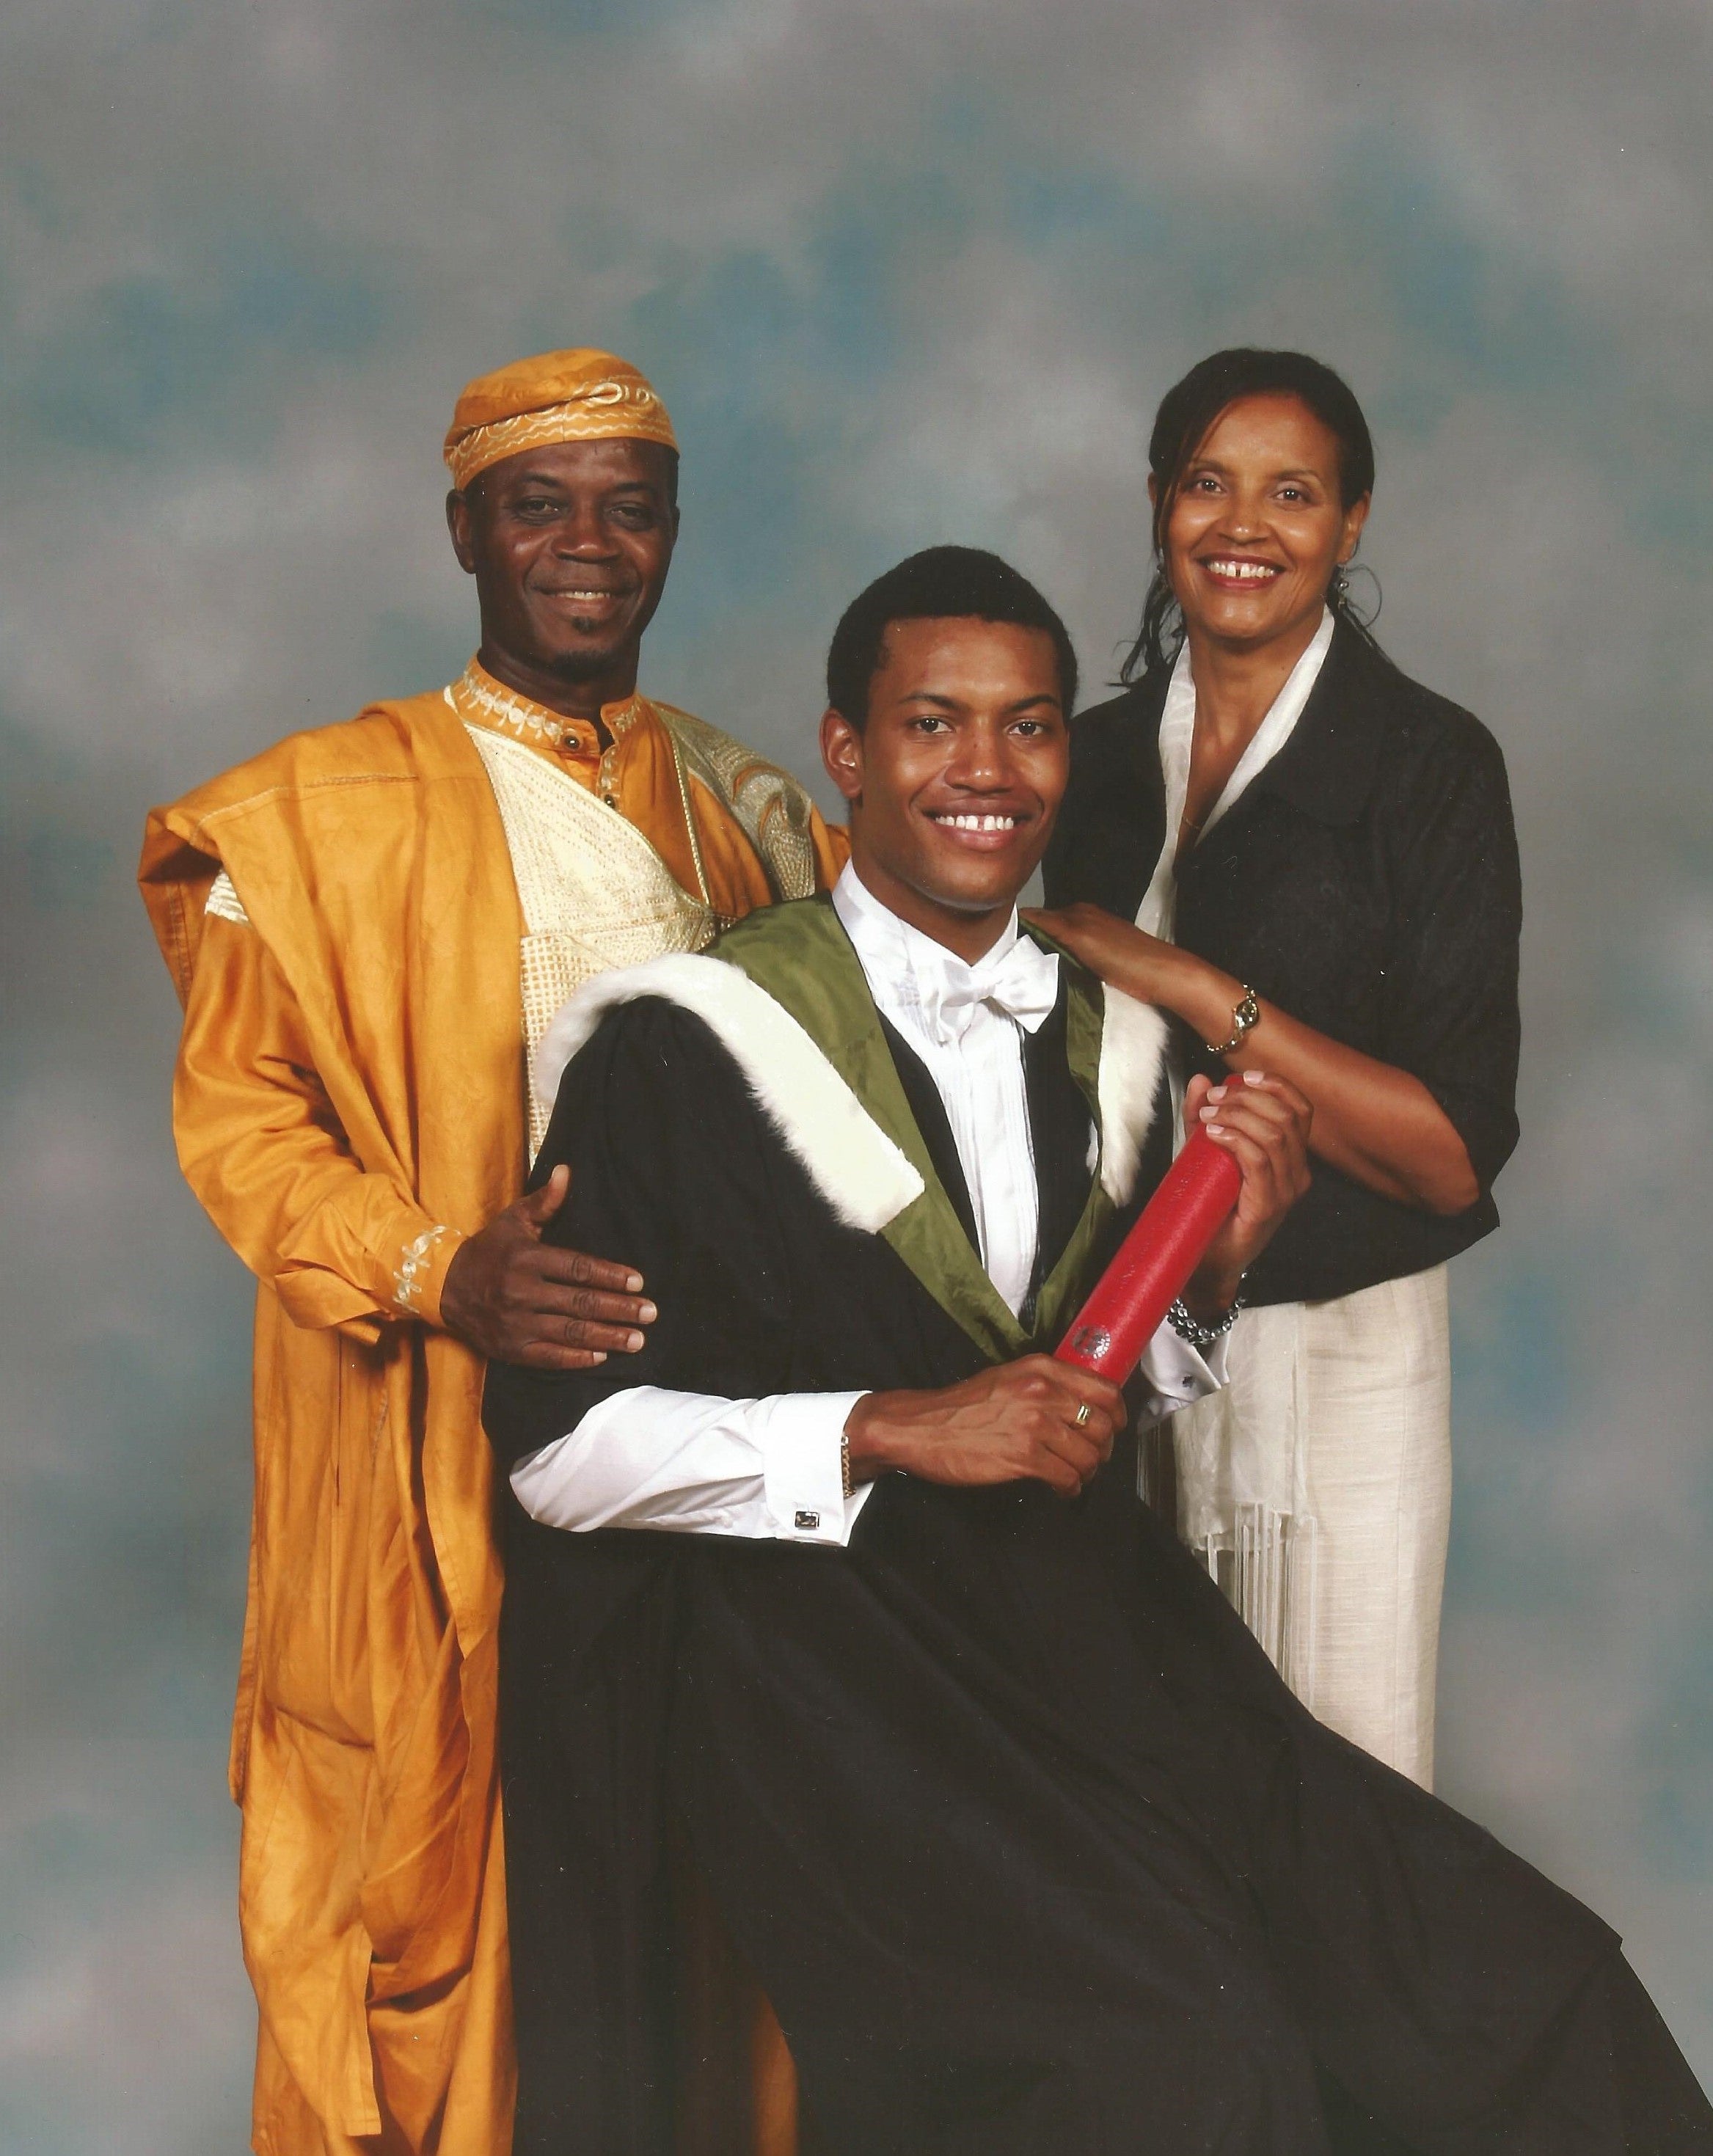 Senam at his graduation with his father, Yao, and mother